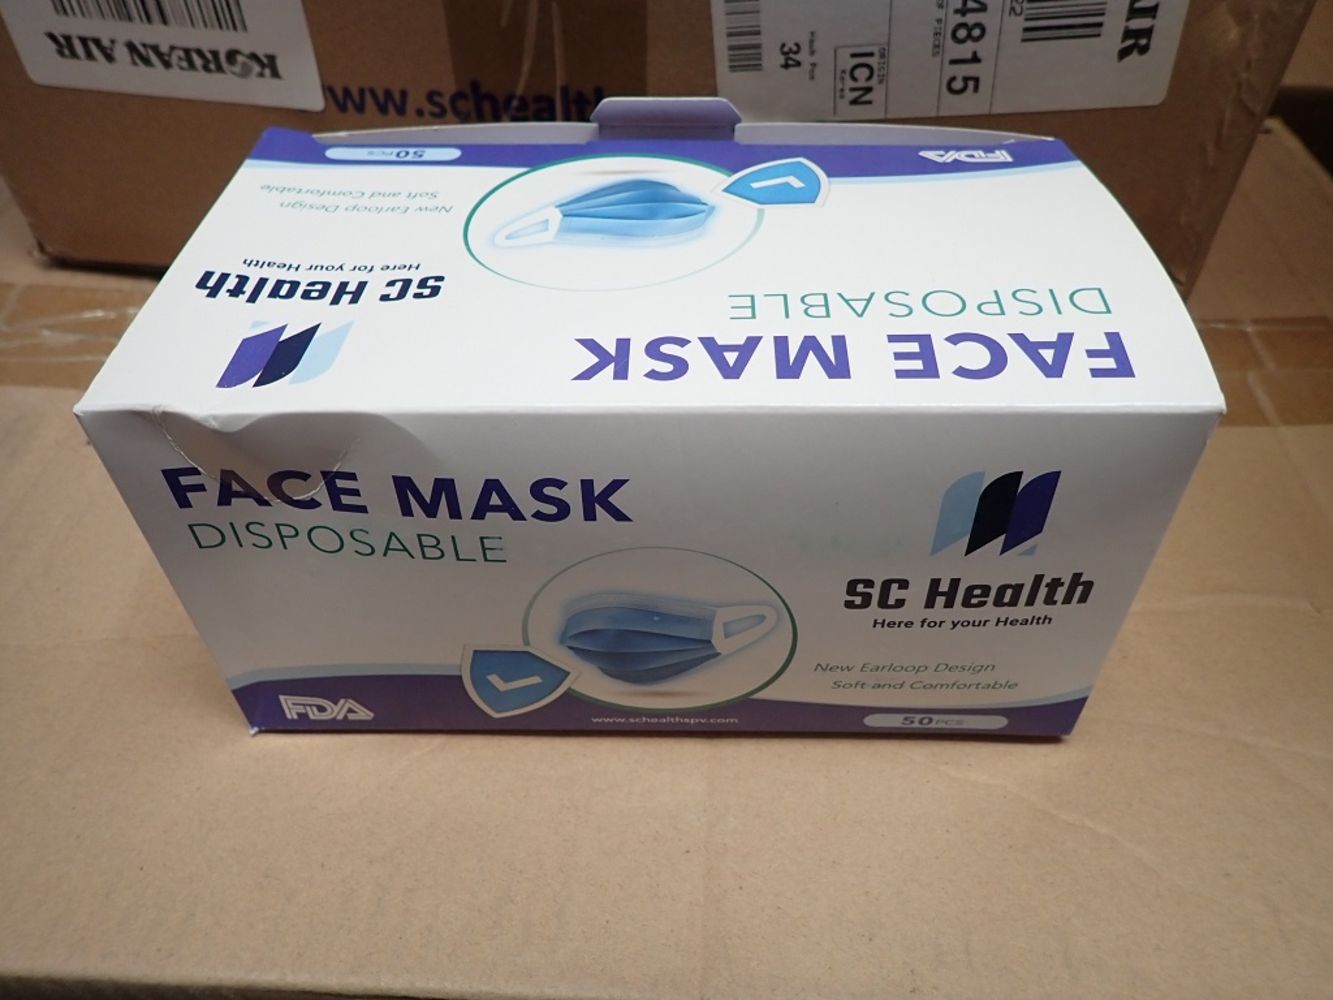 PPE Supplies: Masks, Gowns, Goggles, Gloves and Aprons